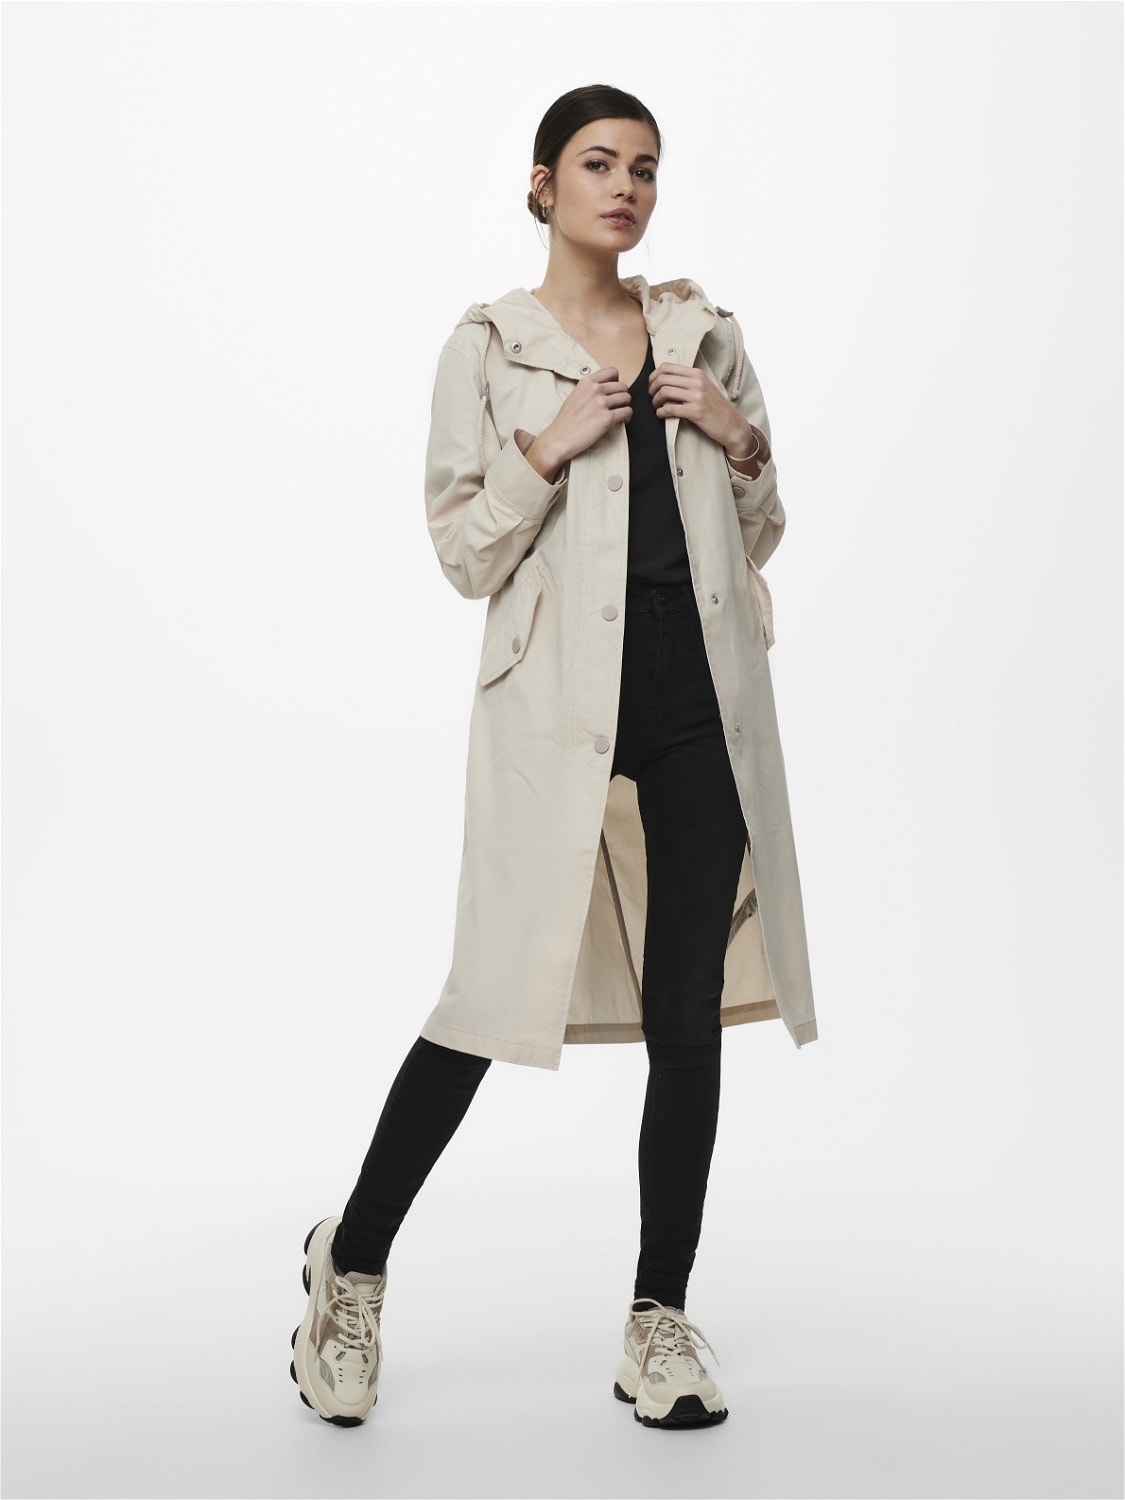 ONLY Long Manteau -Pumice Stone - 15221245